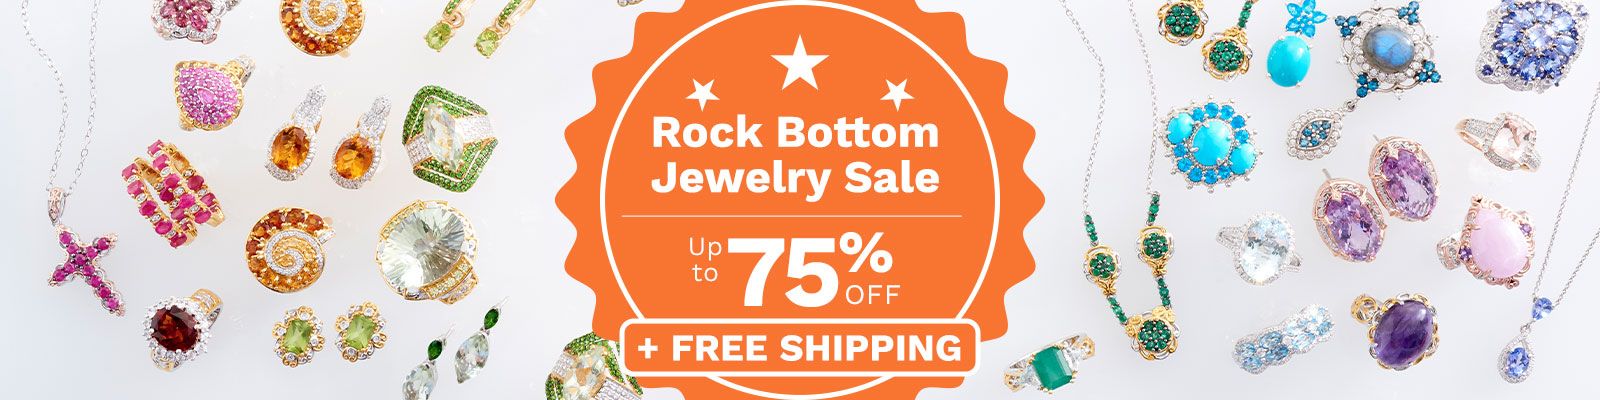 Rock Bottom Jewelry Sale  Up to 75% Off + Free Shipping